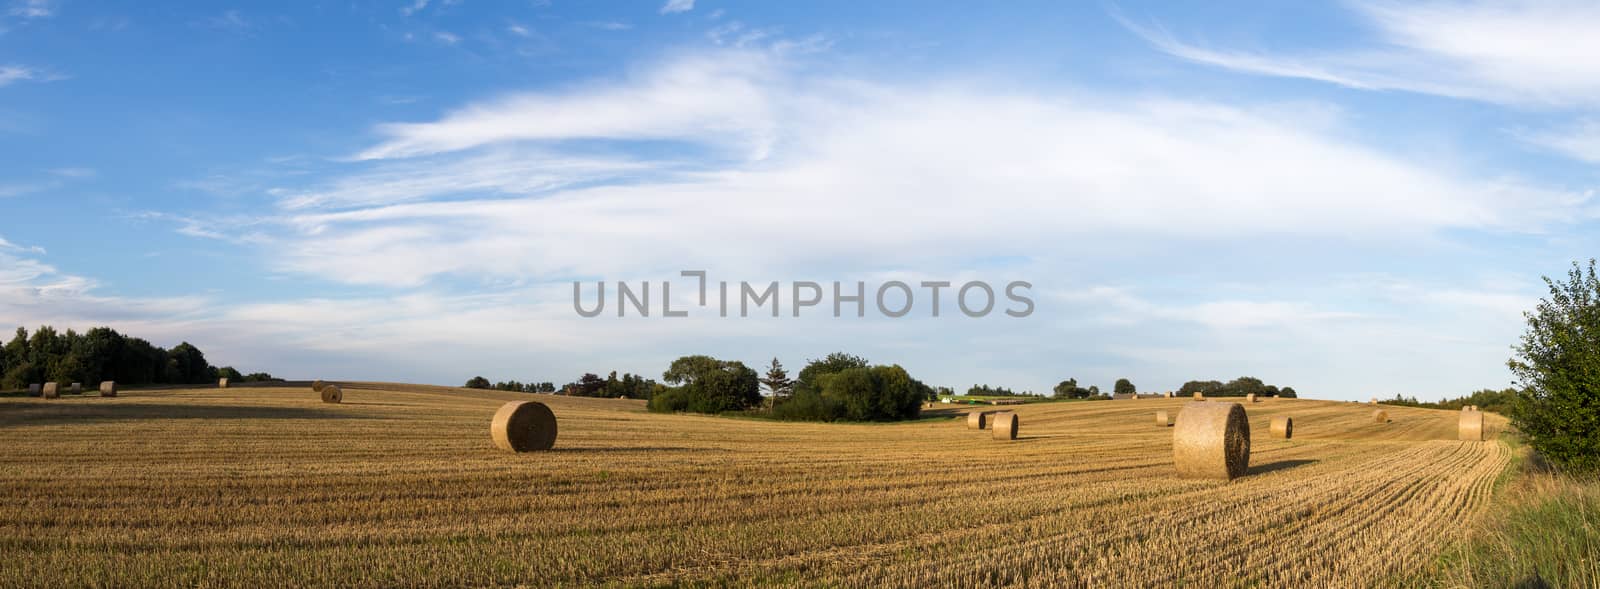 Panoramic view of hay bales on a field on the countryside in Denmark